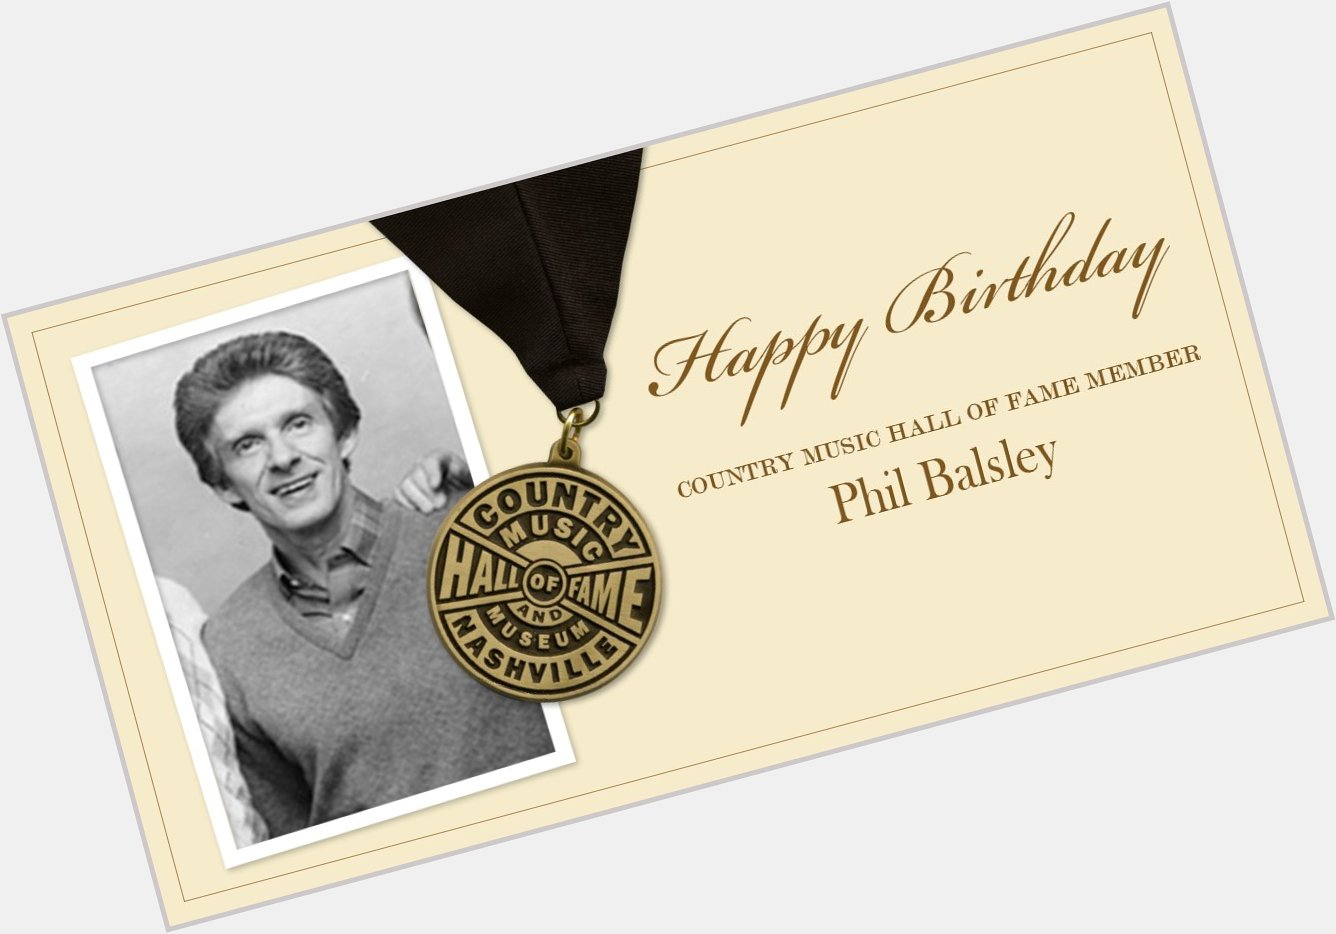 Join us in wishing a happy birthday to Phil Balsley of members The Statler Brothers! 